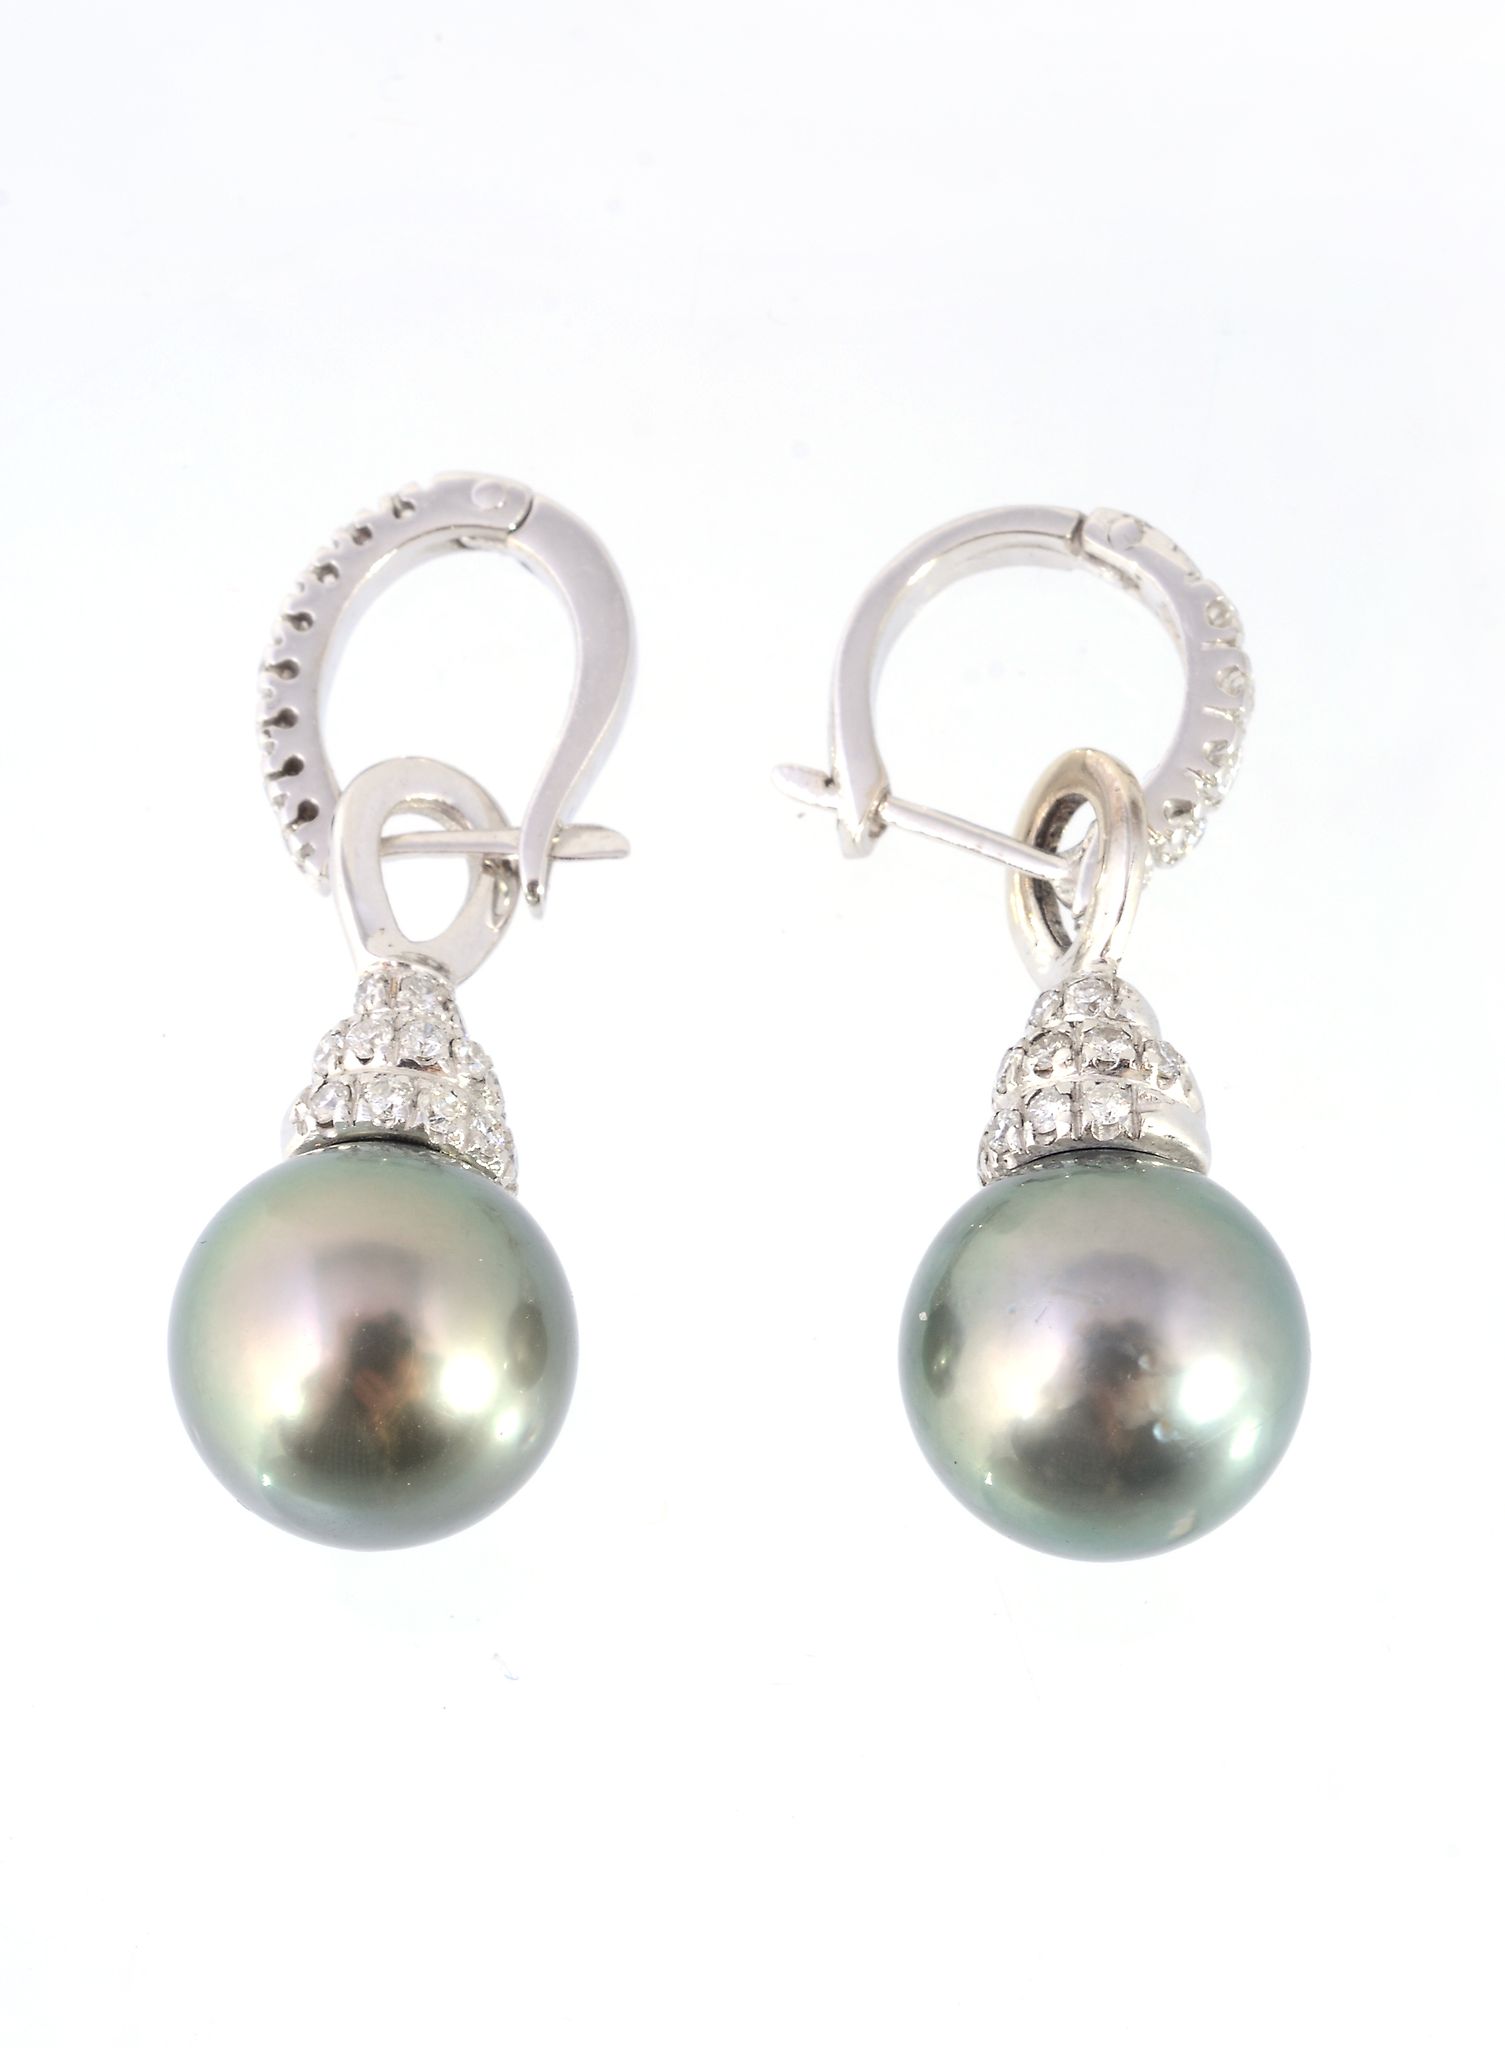 A pair of diamond and South Sea cultured pearl ear pendents, the diamond set earhoops with